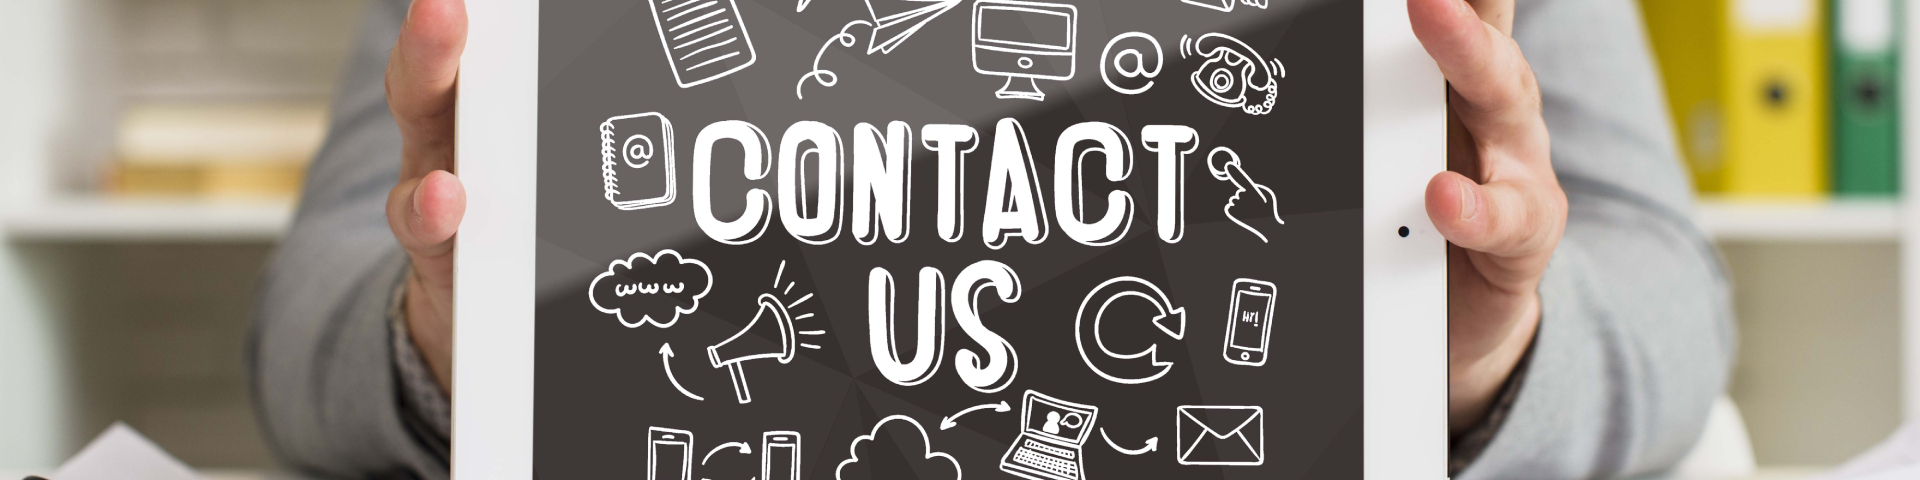 Contact us banner